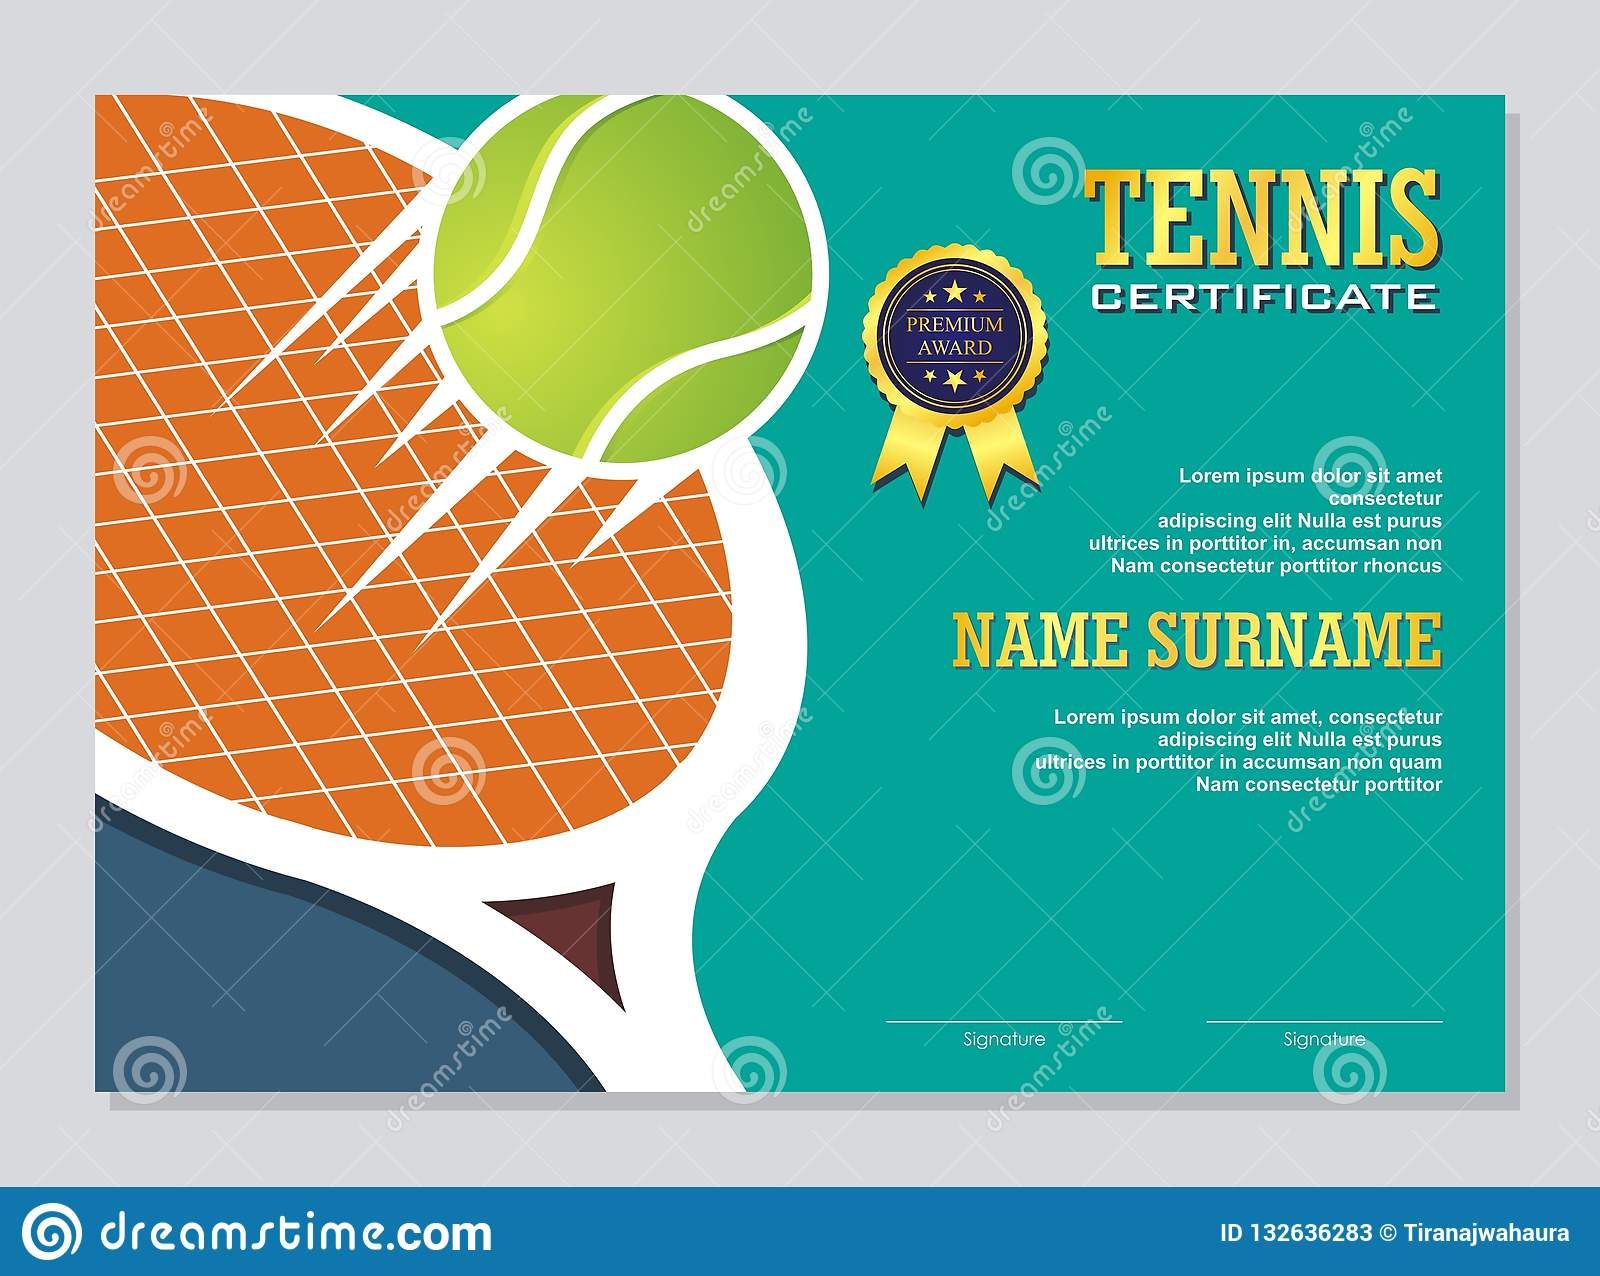 Tennis Certificate – Award Template With Colorful And Stylish  Intended For Tennis Certificate Template Free